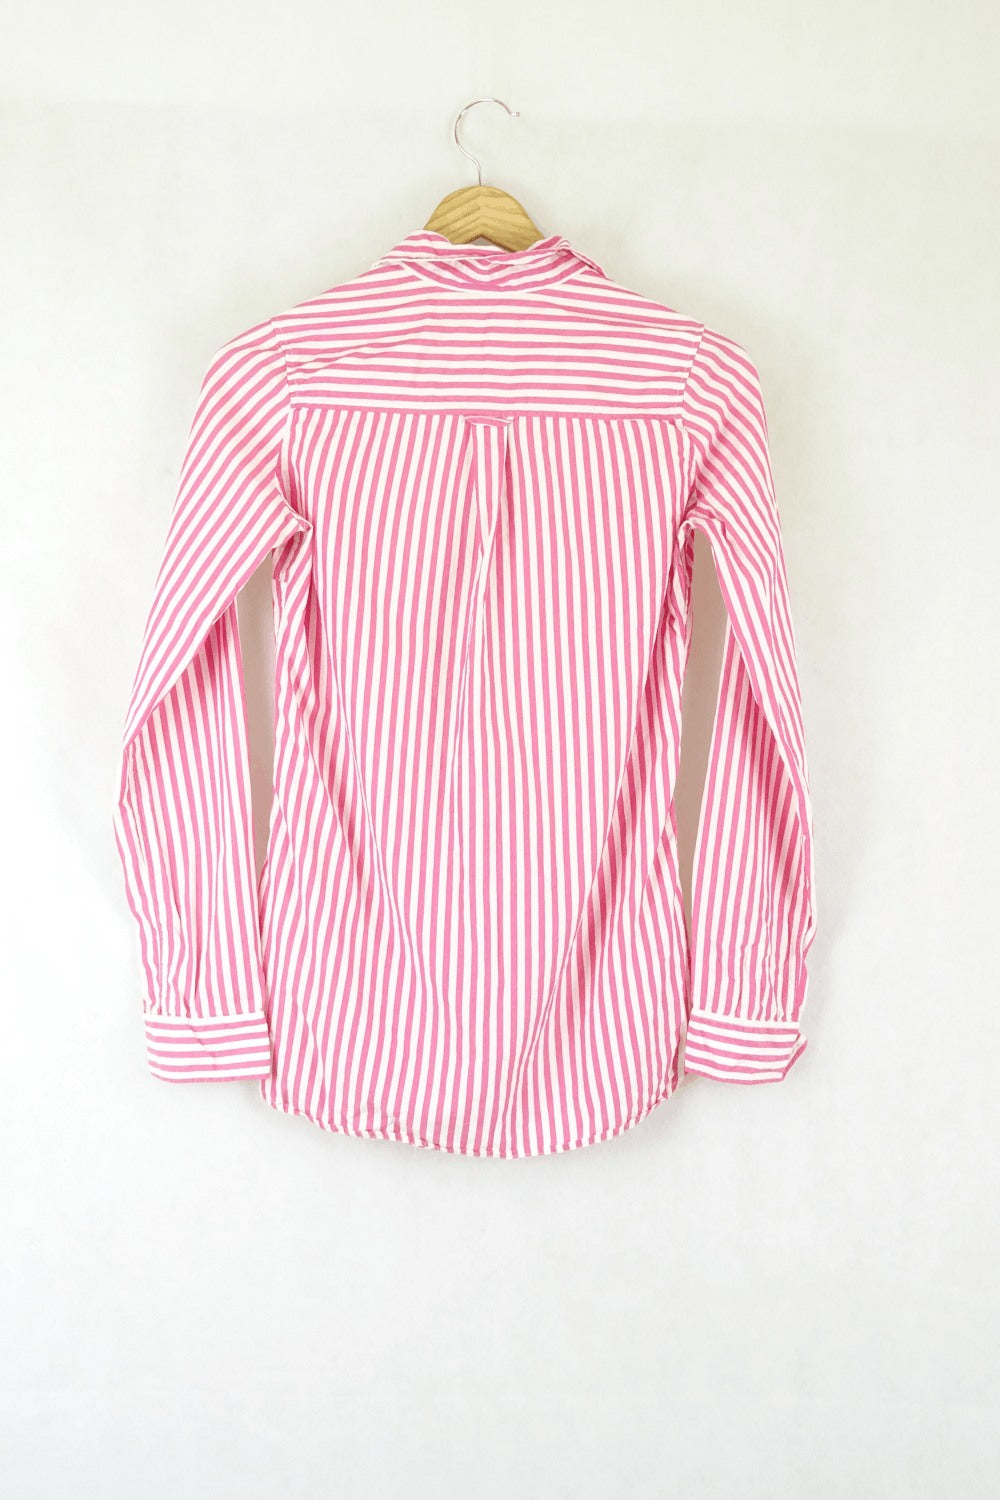 Topshop Pink And White Button Down Shirt S